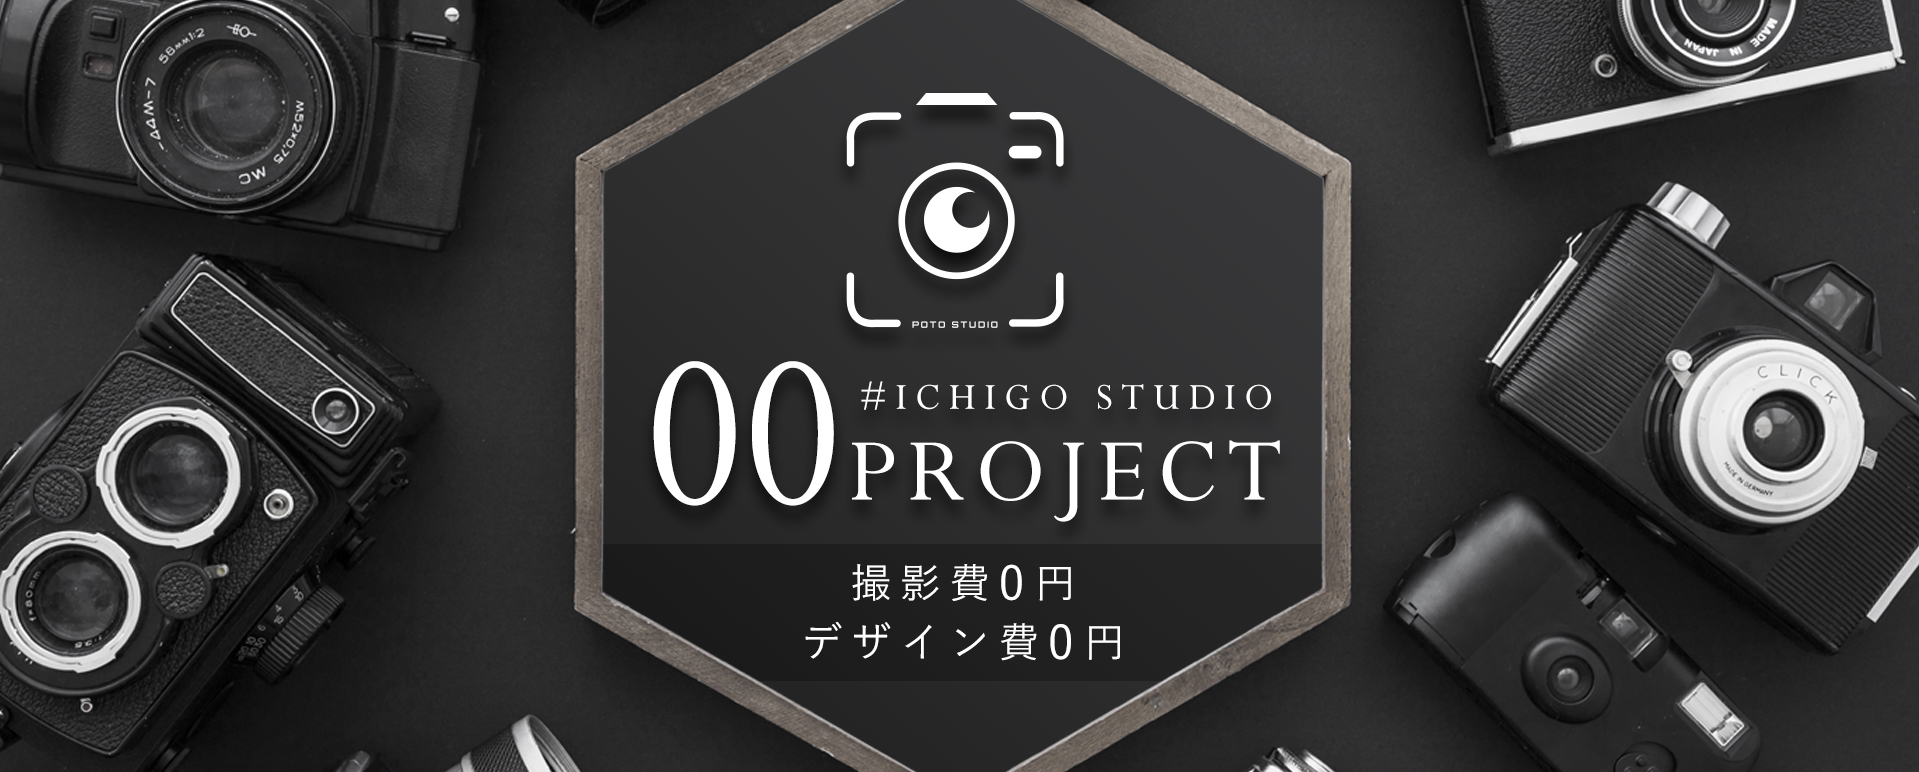 00project